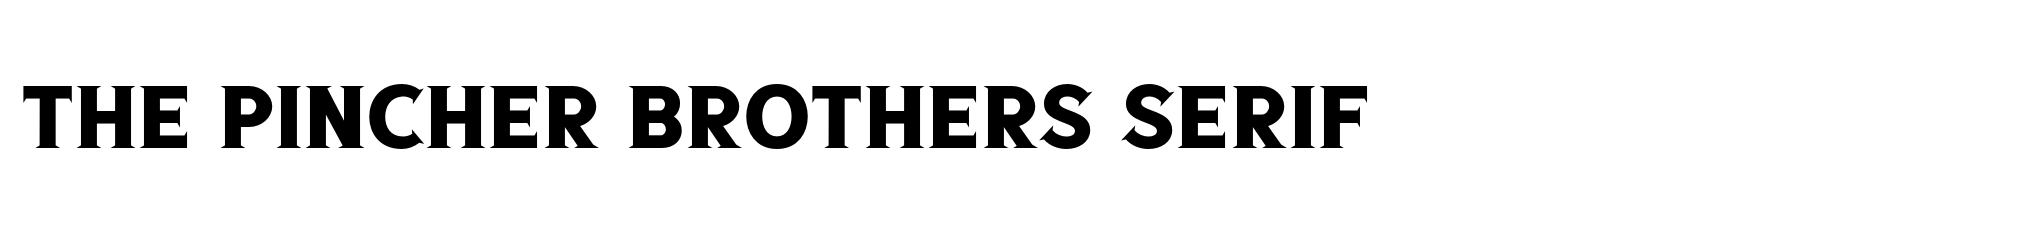 The Pincher Brothers Serif image